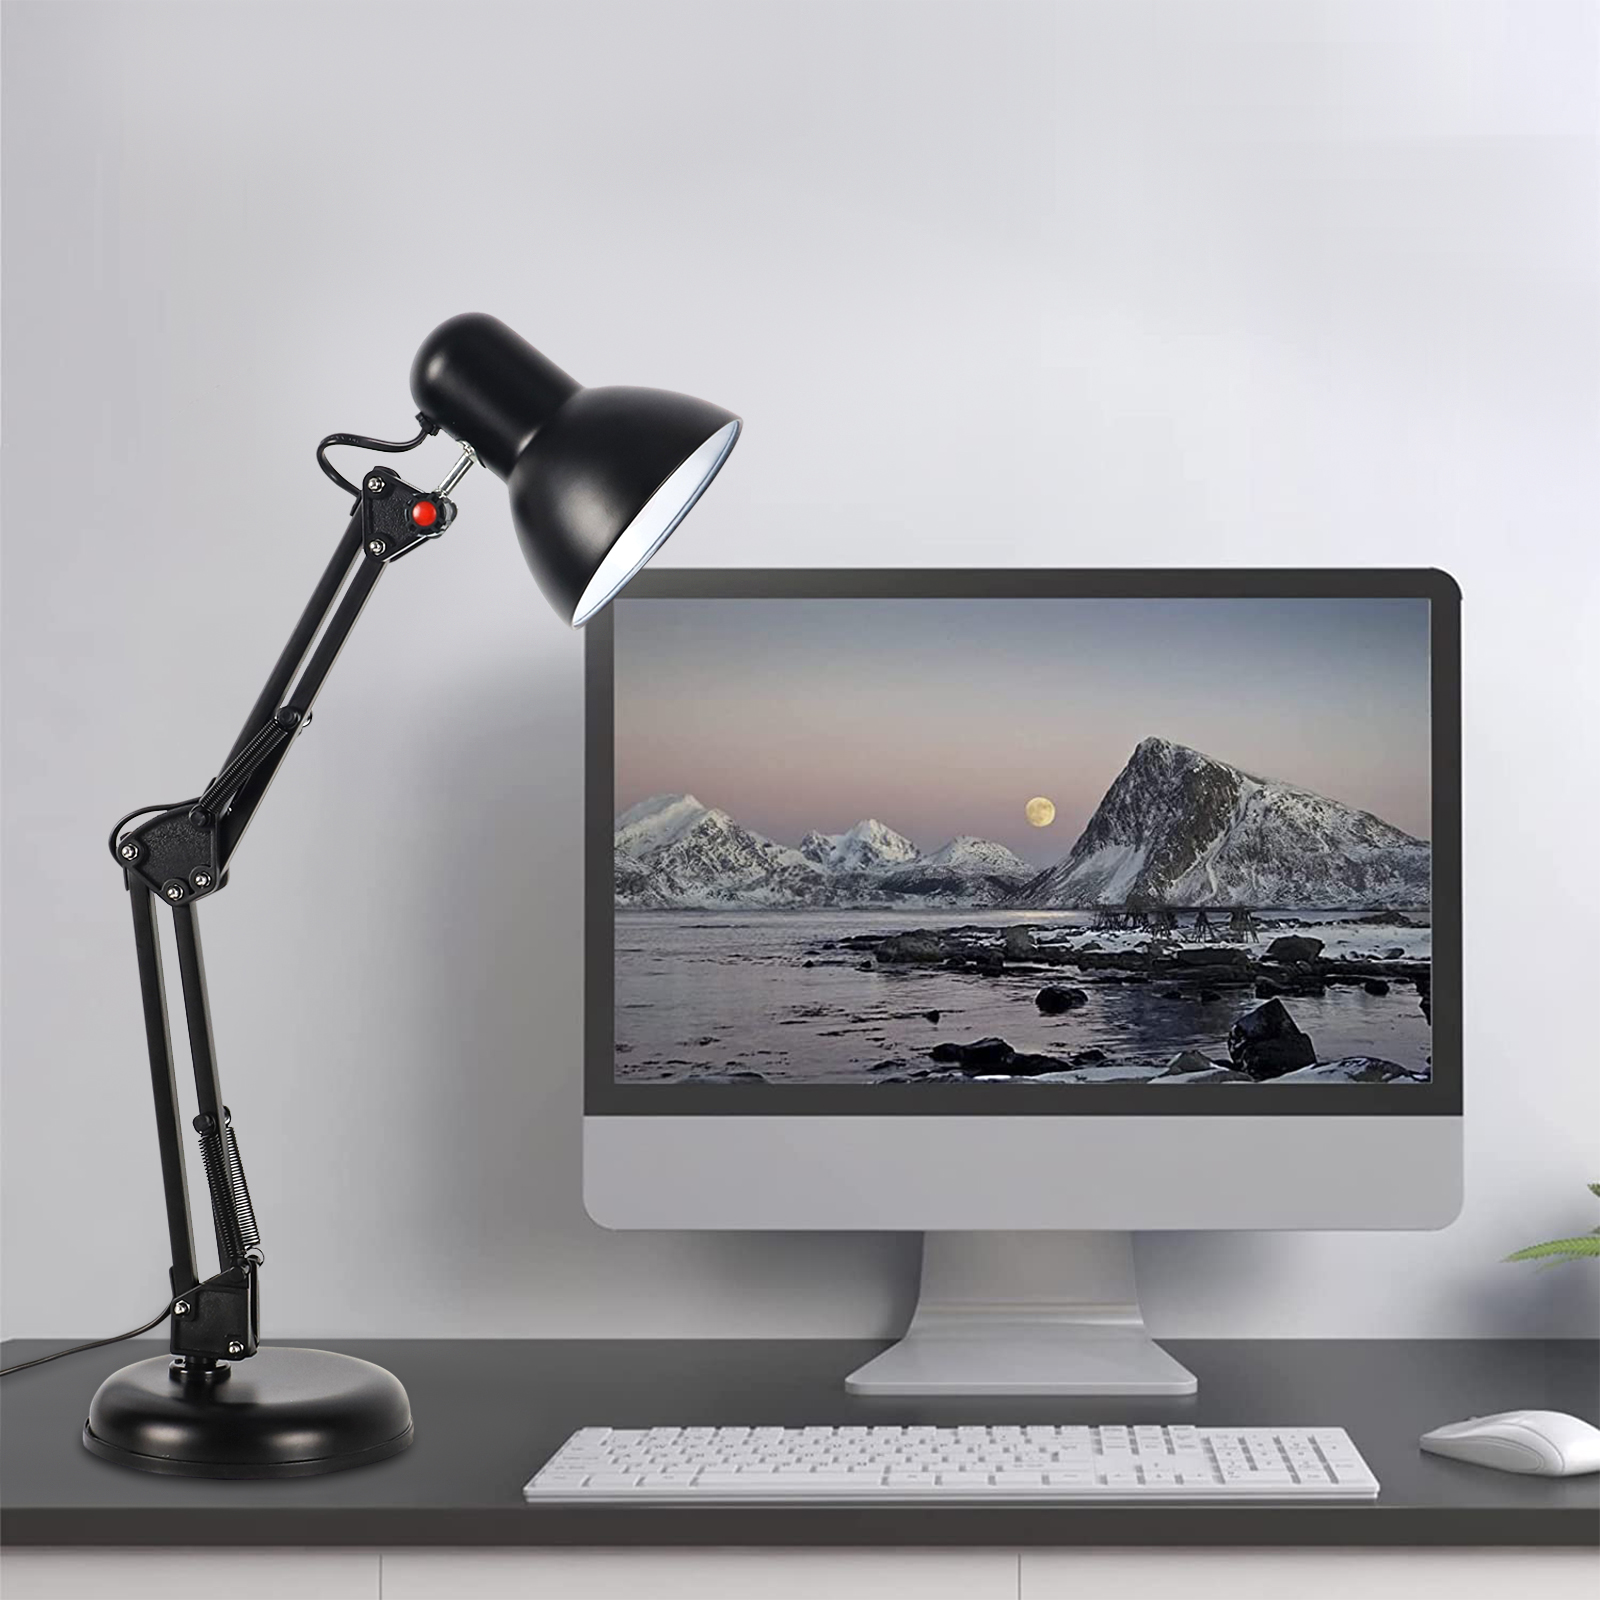 Table Lamp For Reading Black Color